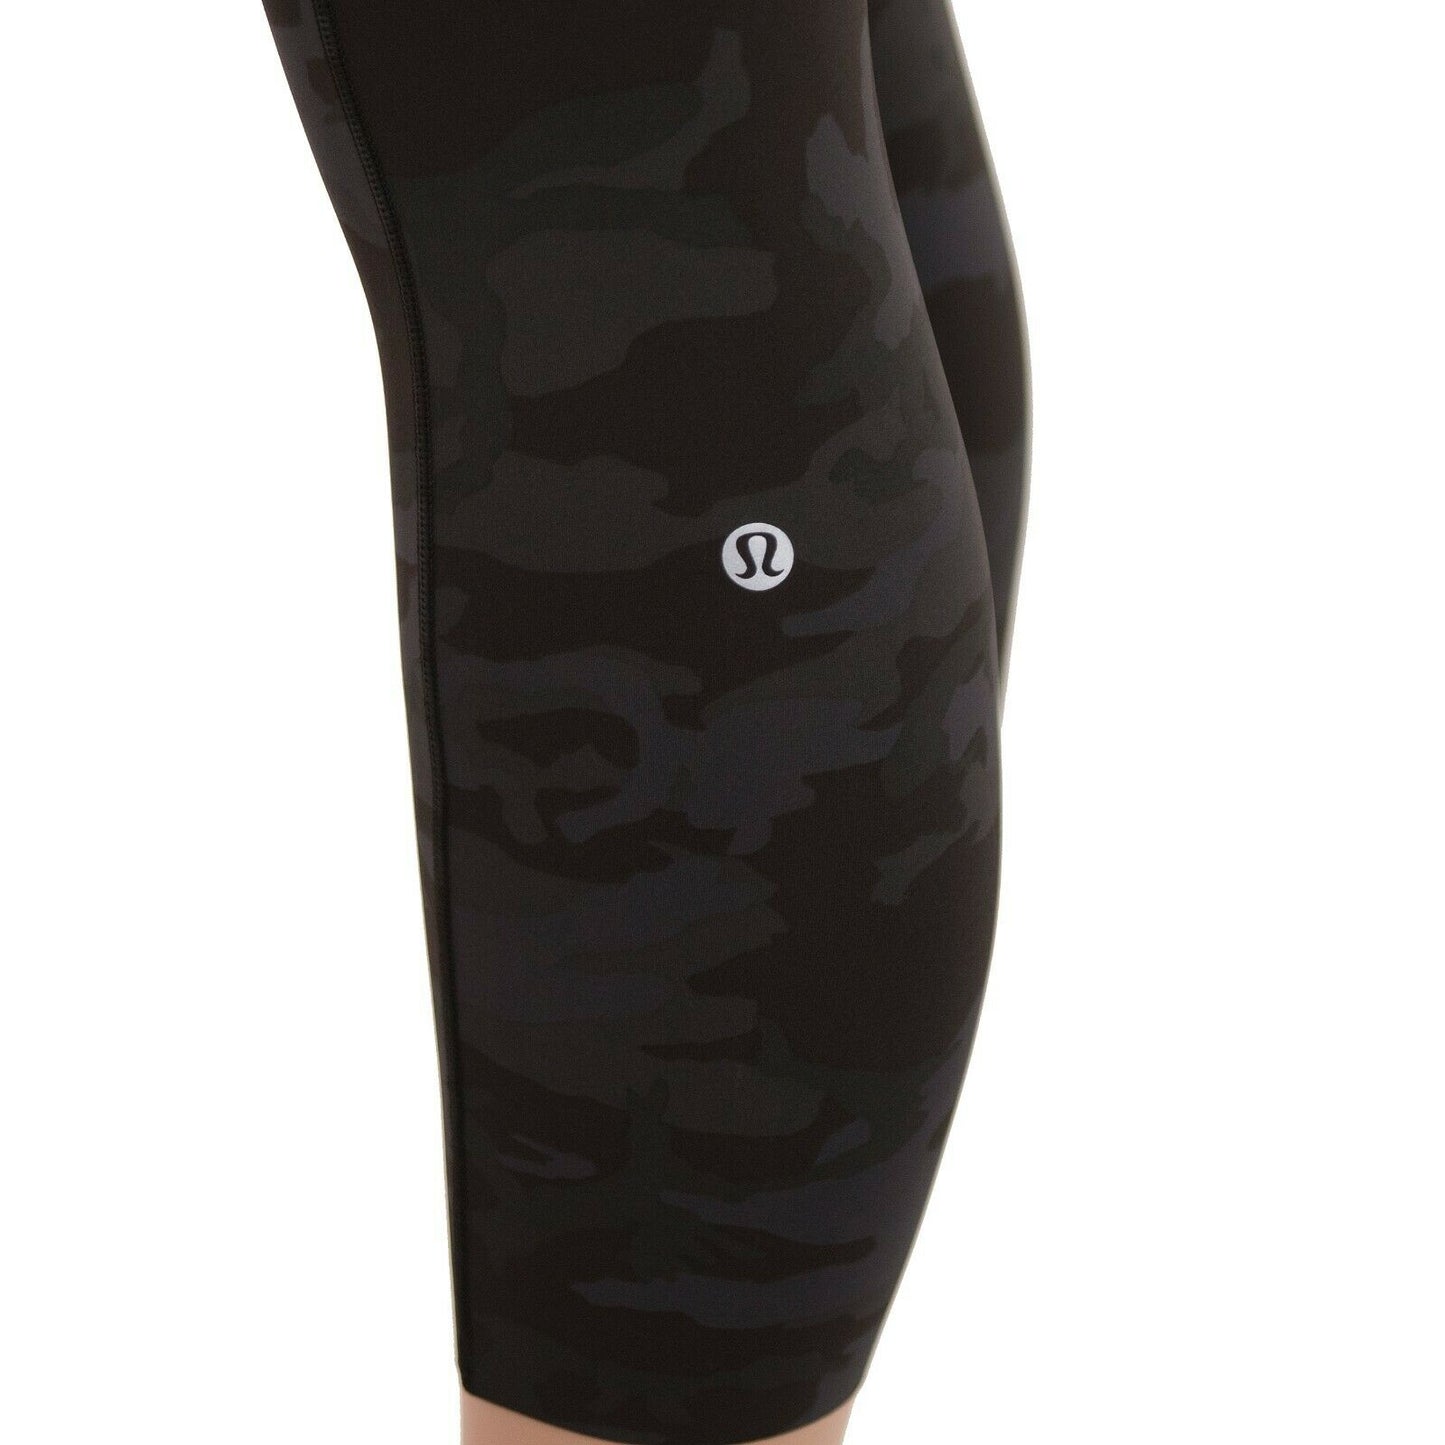 Lululemon Black Camo Fast Free HR Crop 23" Tight Fitted Leggings NWOT Size 2